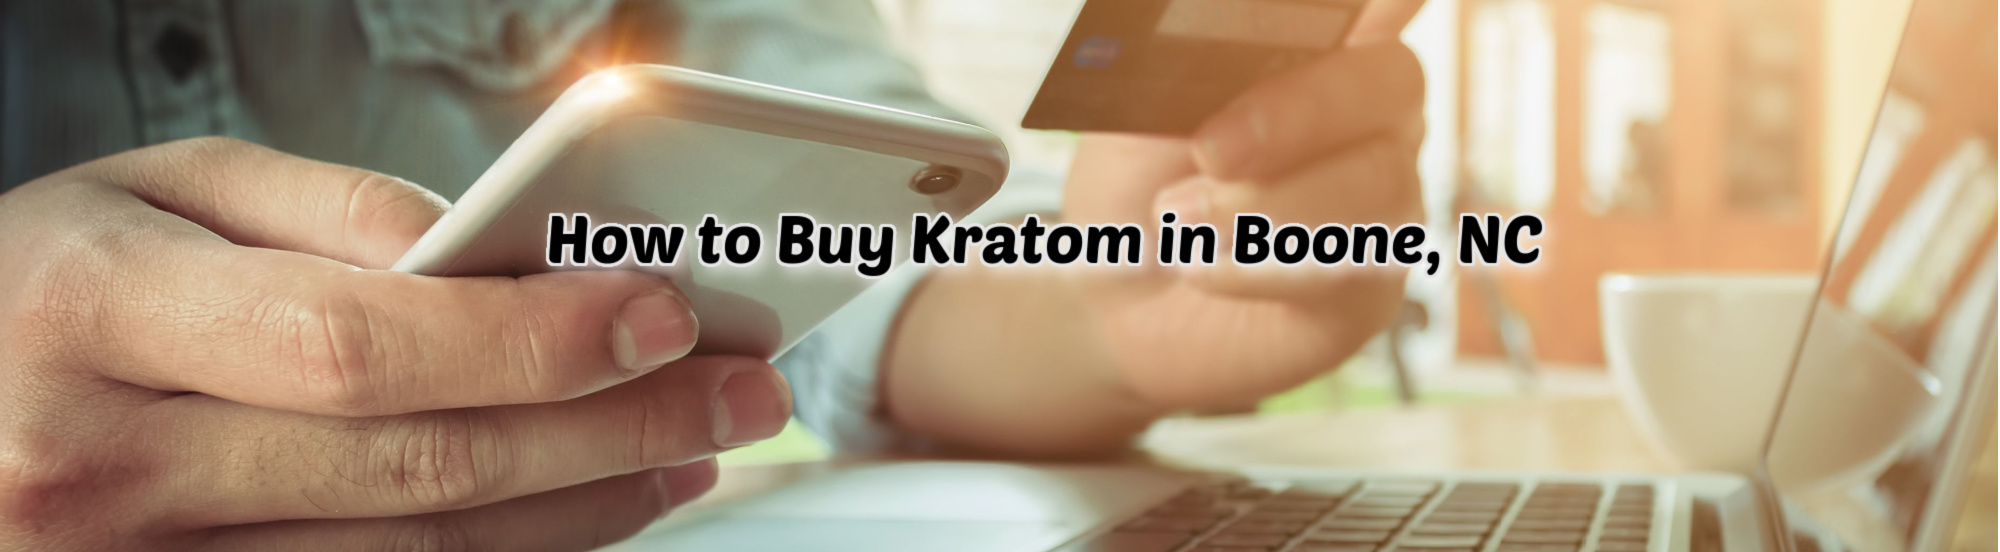 image of how to buy kratom in boone nc